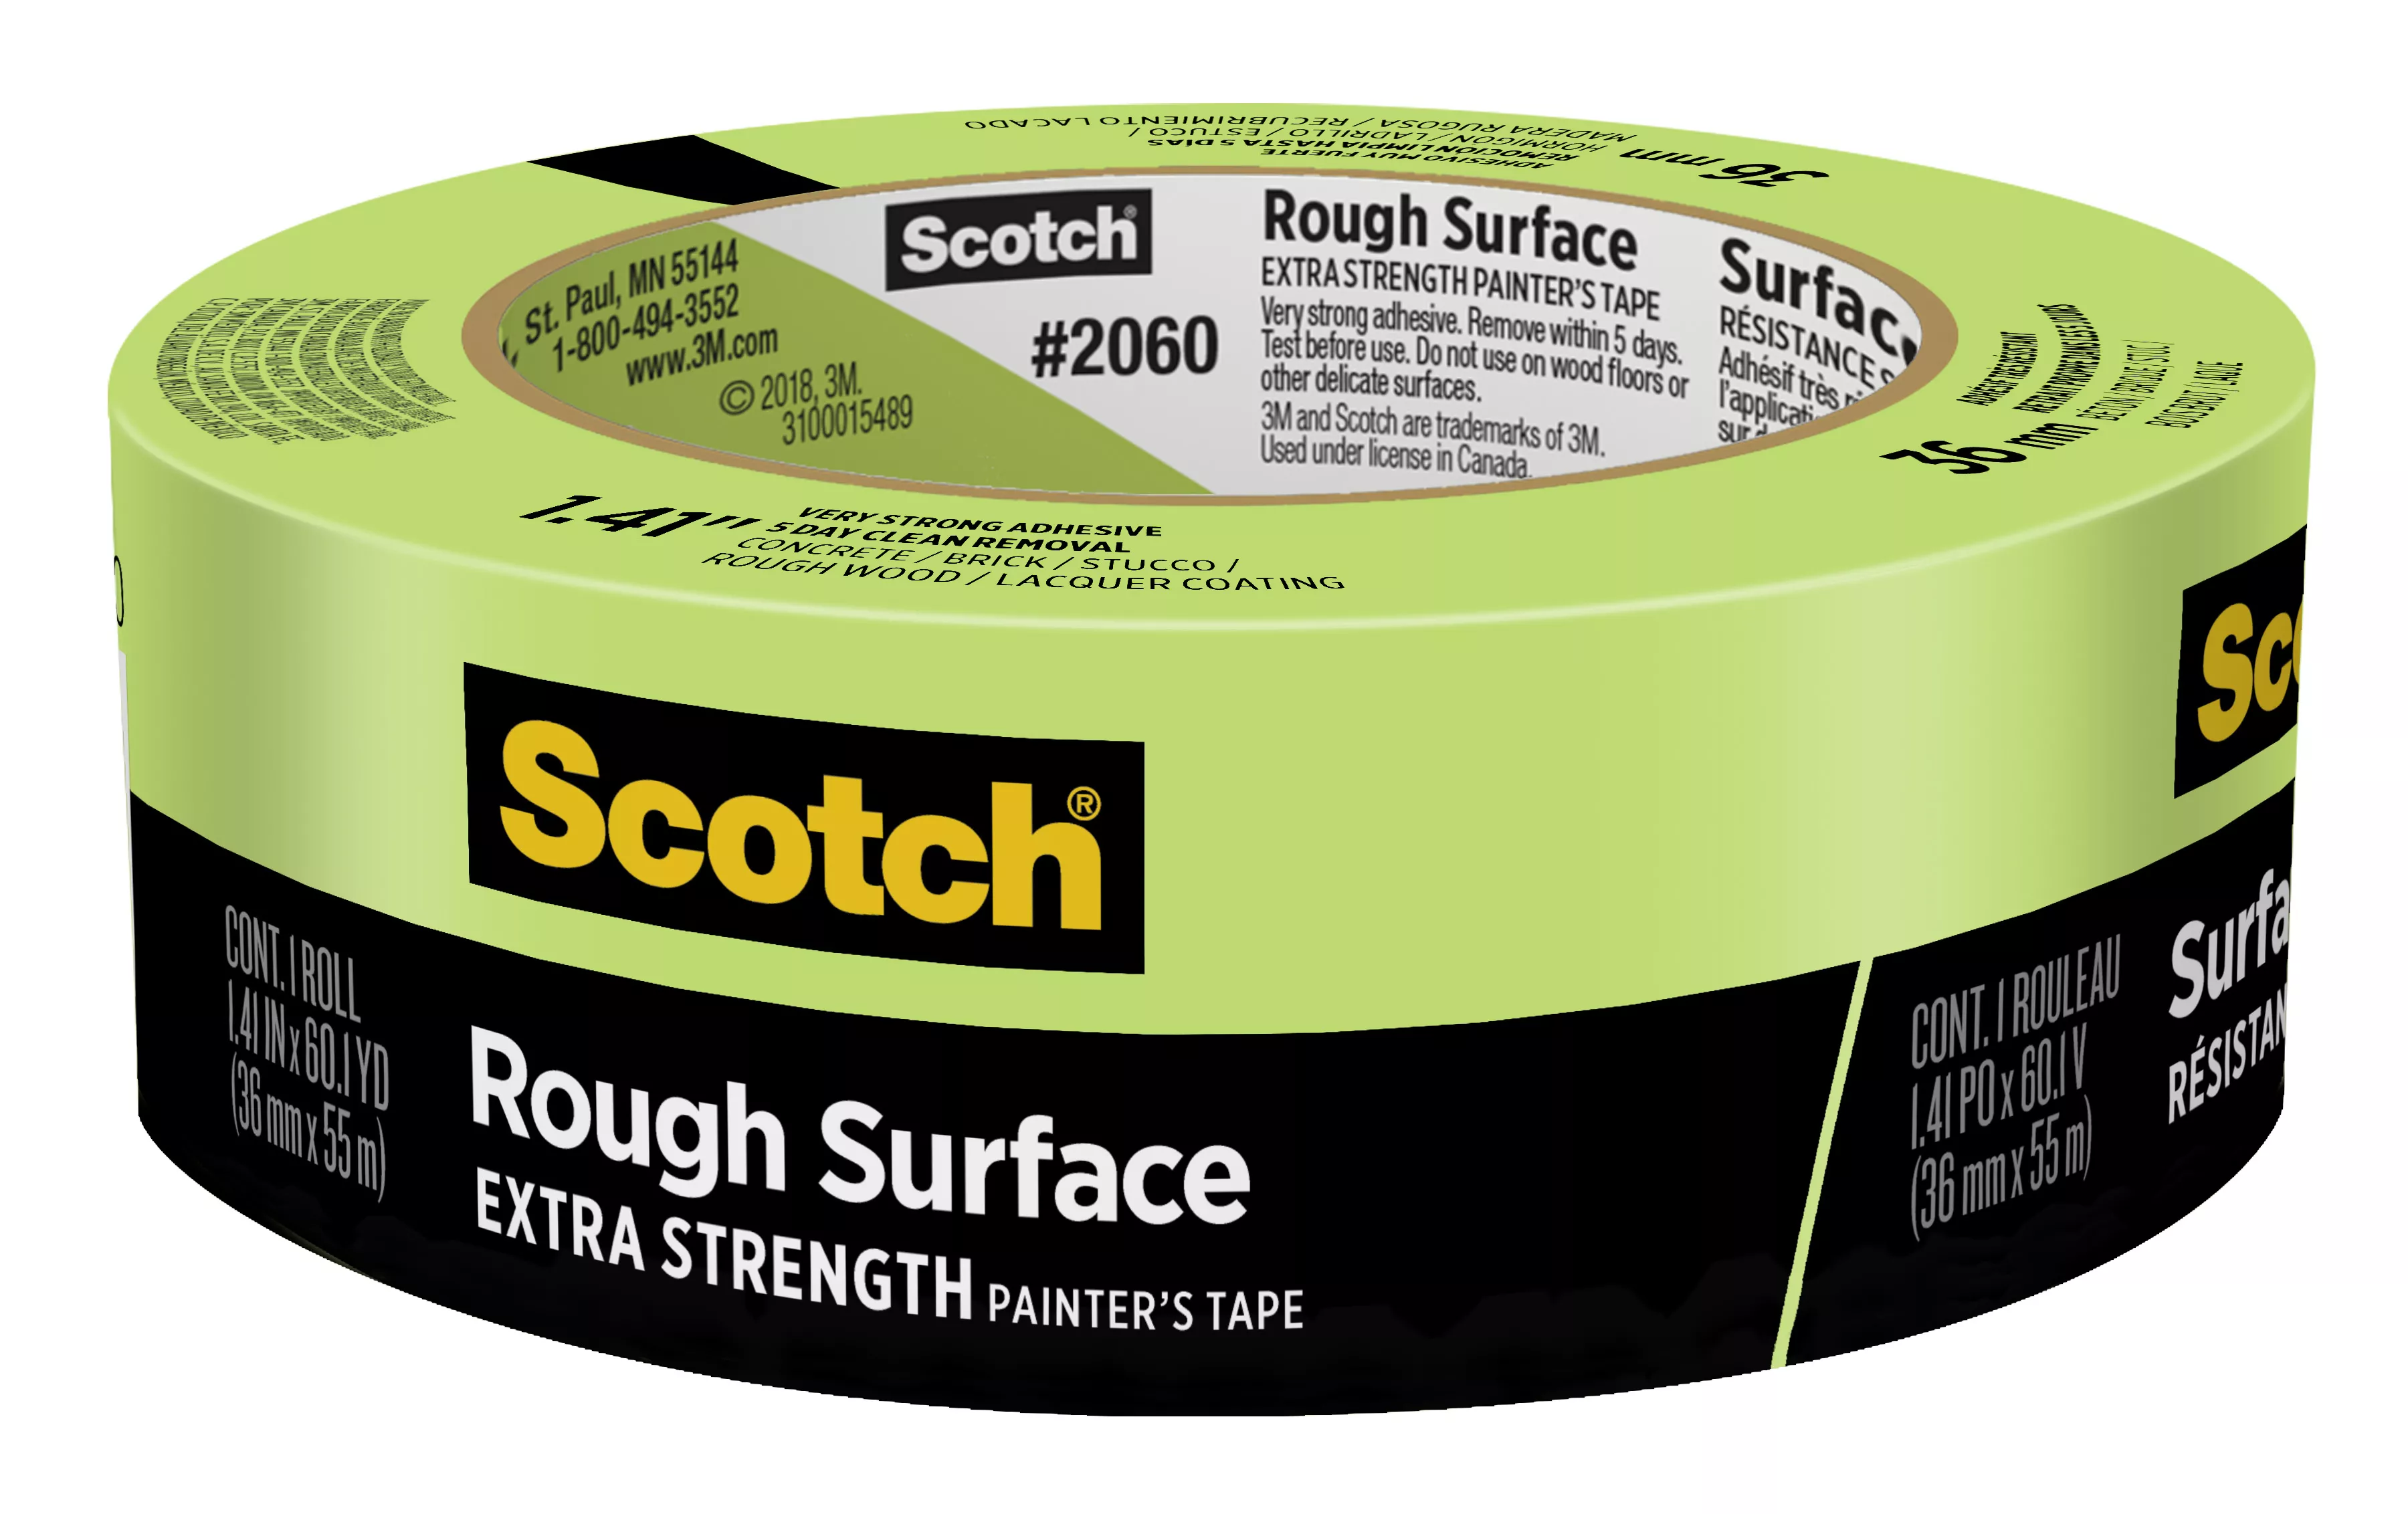 Scotch® Rough Surface Painter's Tape 2060-36AP, 1.41 in x 60.1 yd (36mm
x 55m)